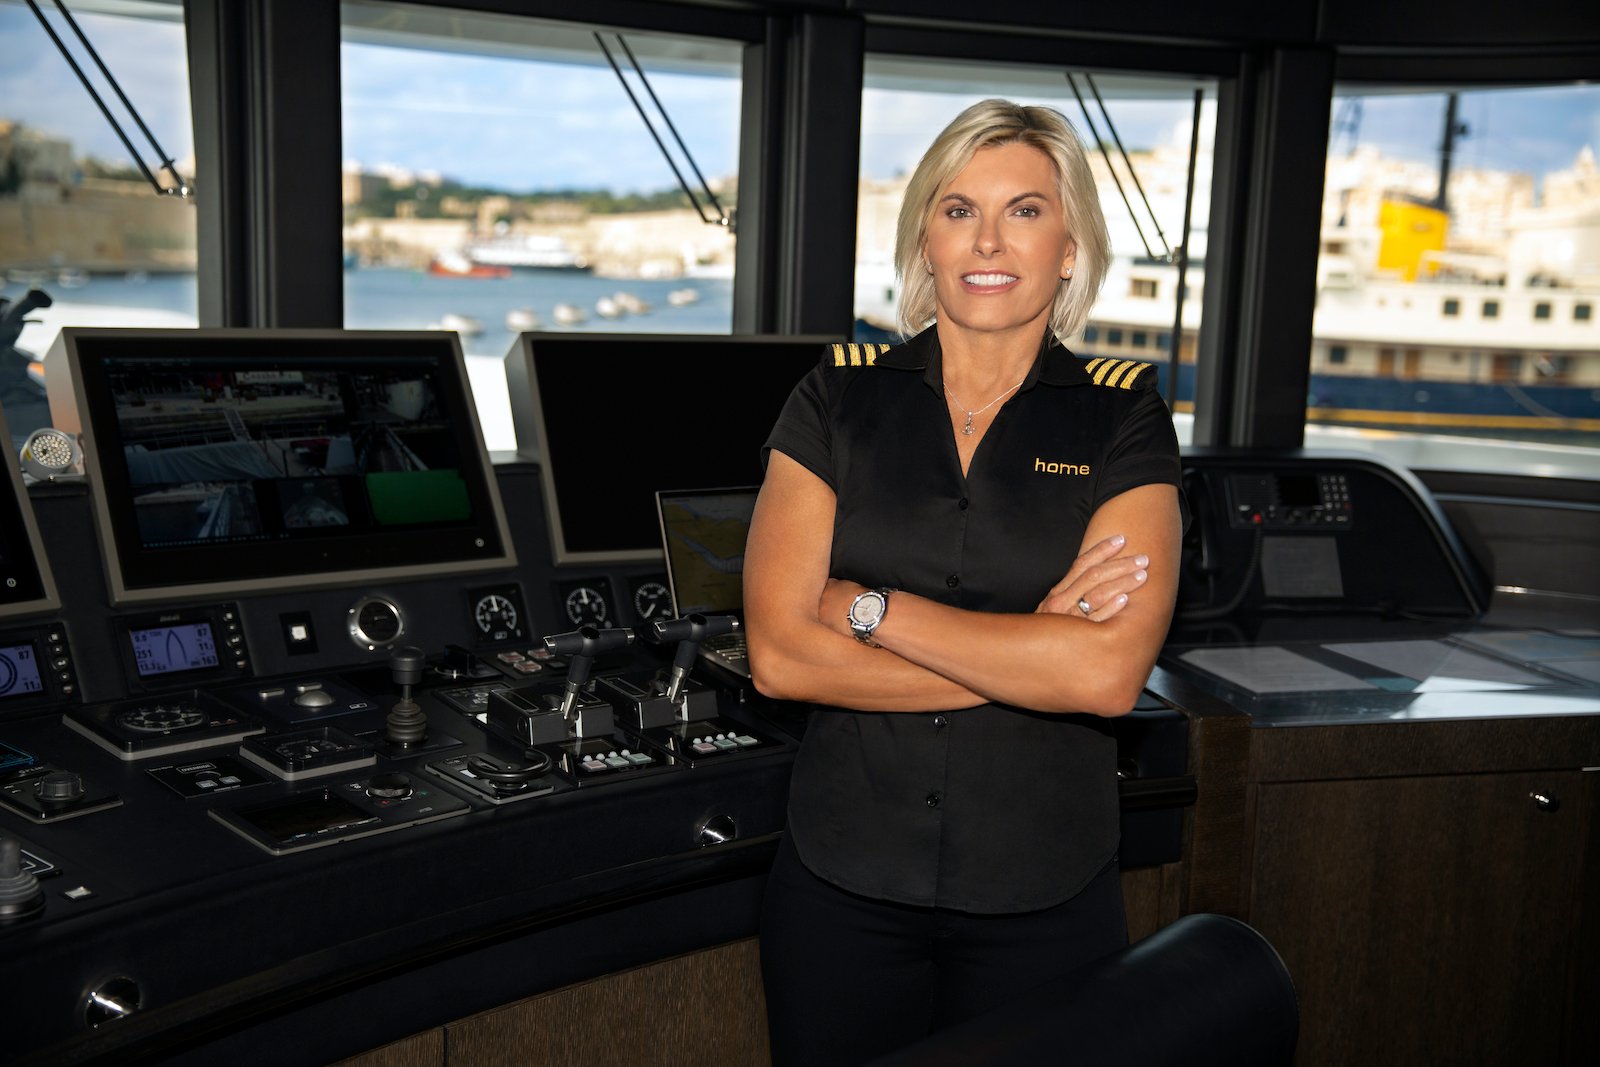 Captain Sandy Yawn from 'Below Deck Med' at the helm of superyacht 'Home'